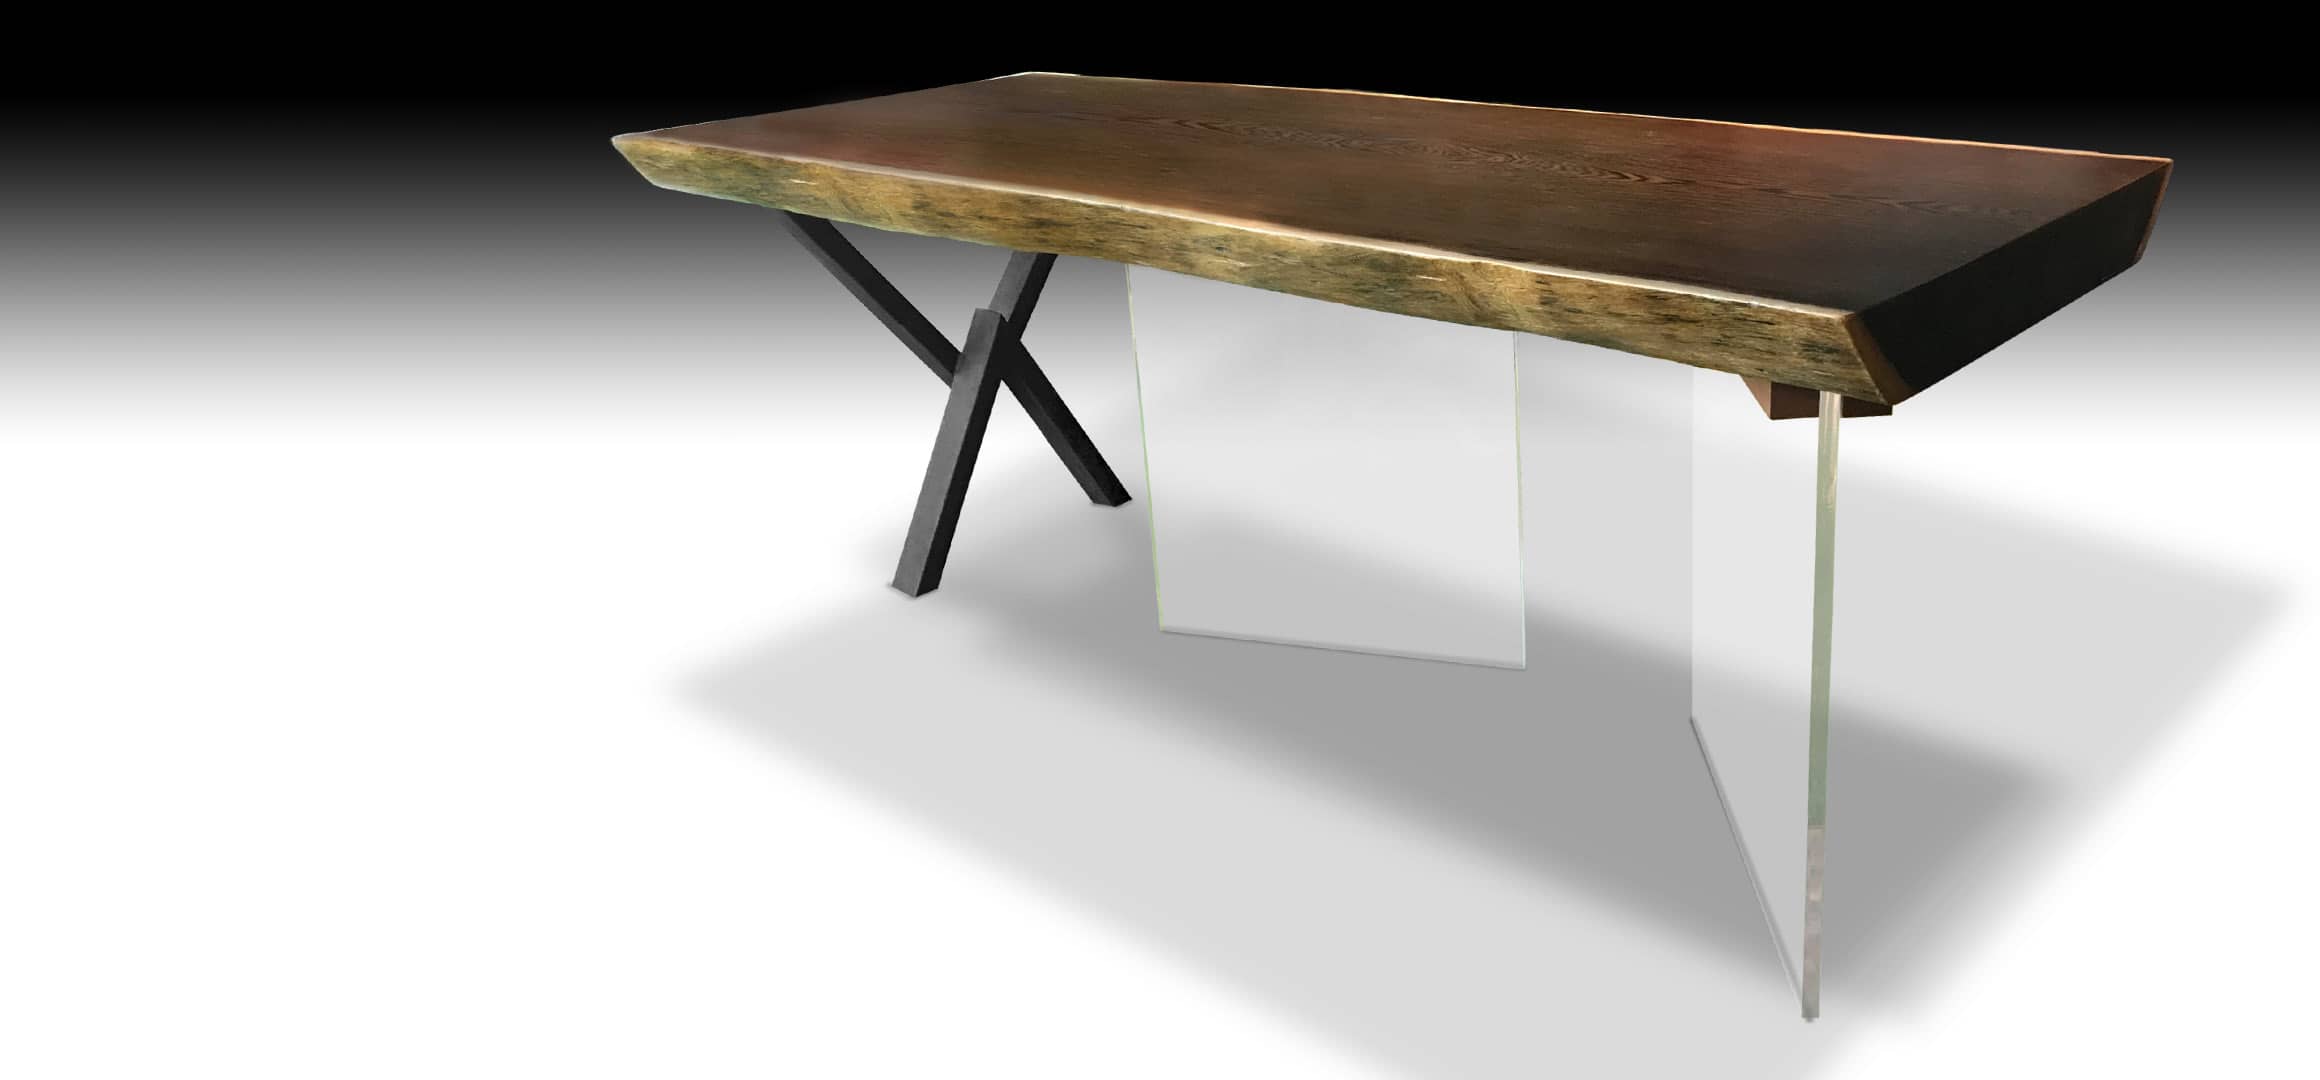 Floating live edge Suar wood dining table